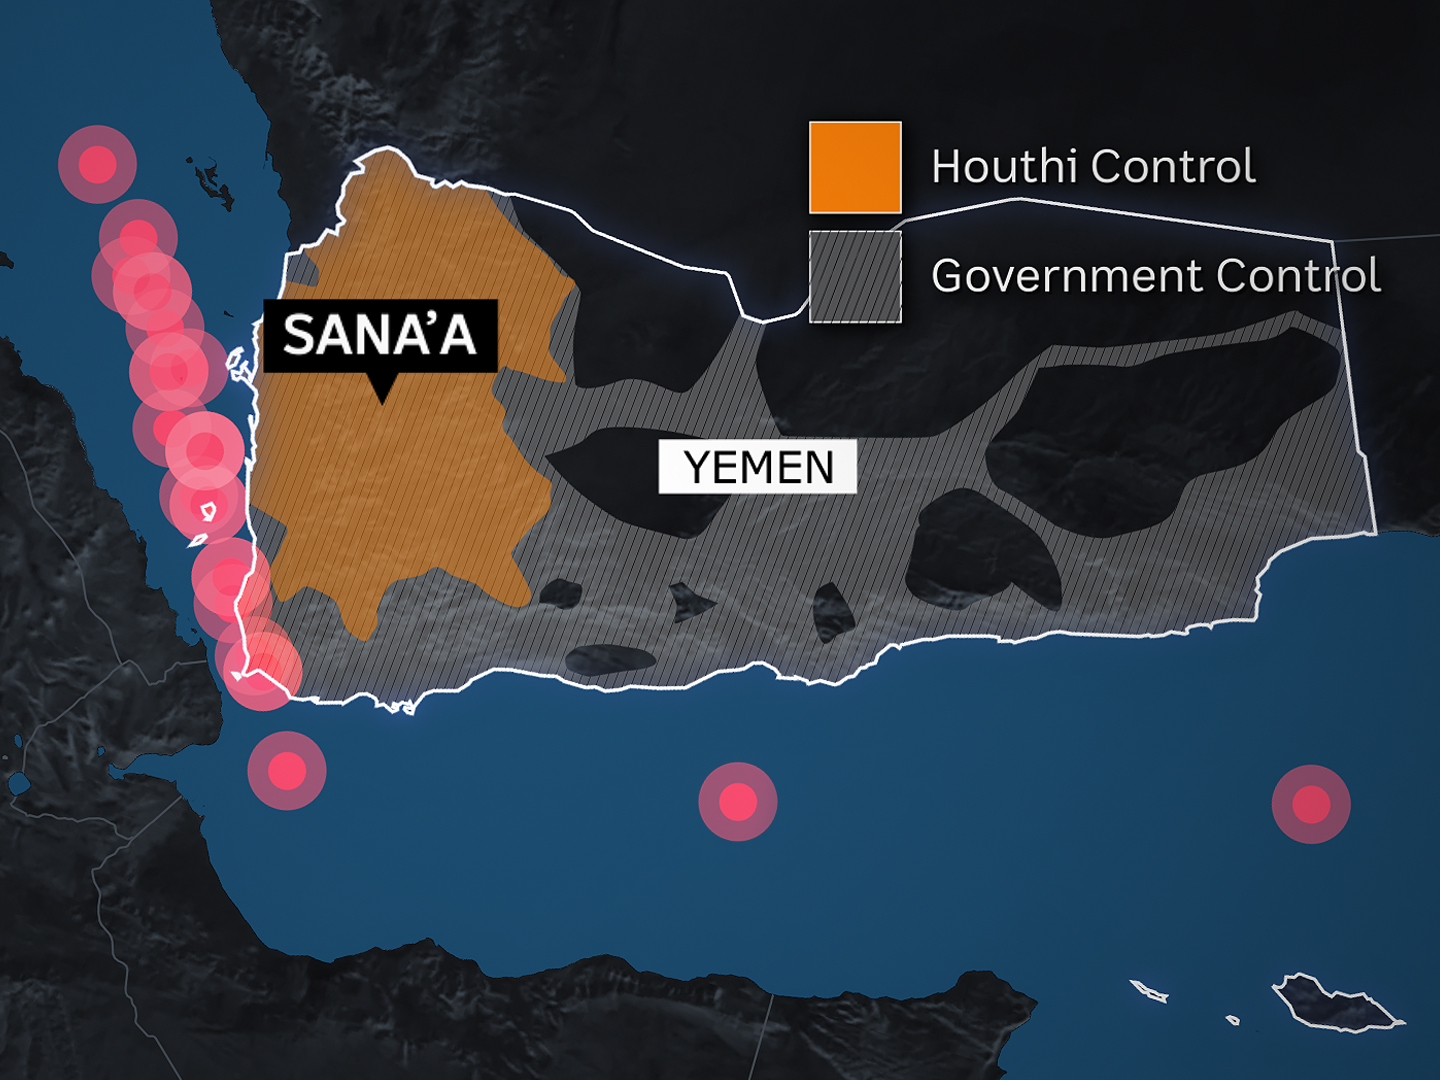 A graphic showing Yemen, territory in the west controlled by Houthi rebels, and the site of multiple attacks upon shipping.